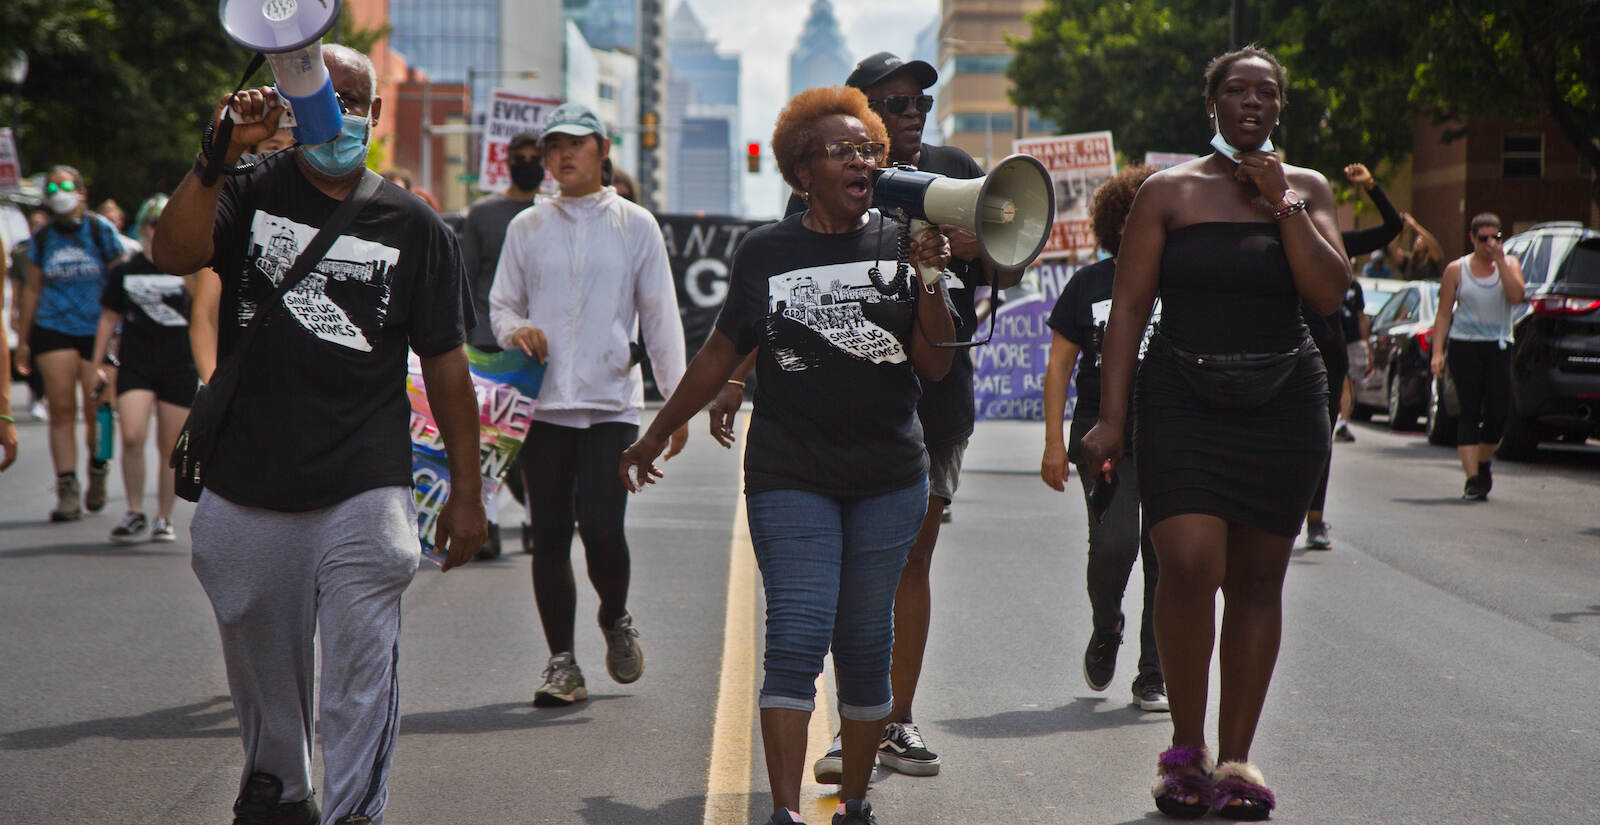 University City Townhomes residents Sheldon David (left), Darlene Forman (second from left), Rasheda Alexander (second from right) and Krystal Young march down a Philly street